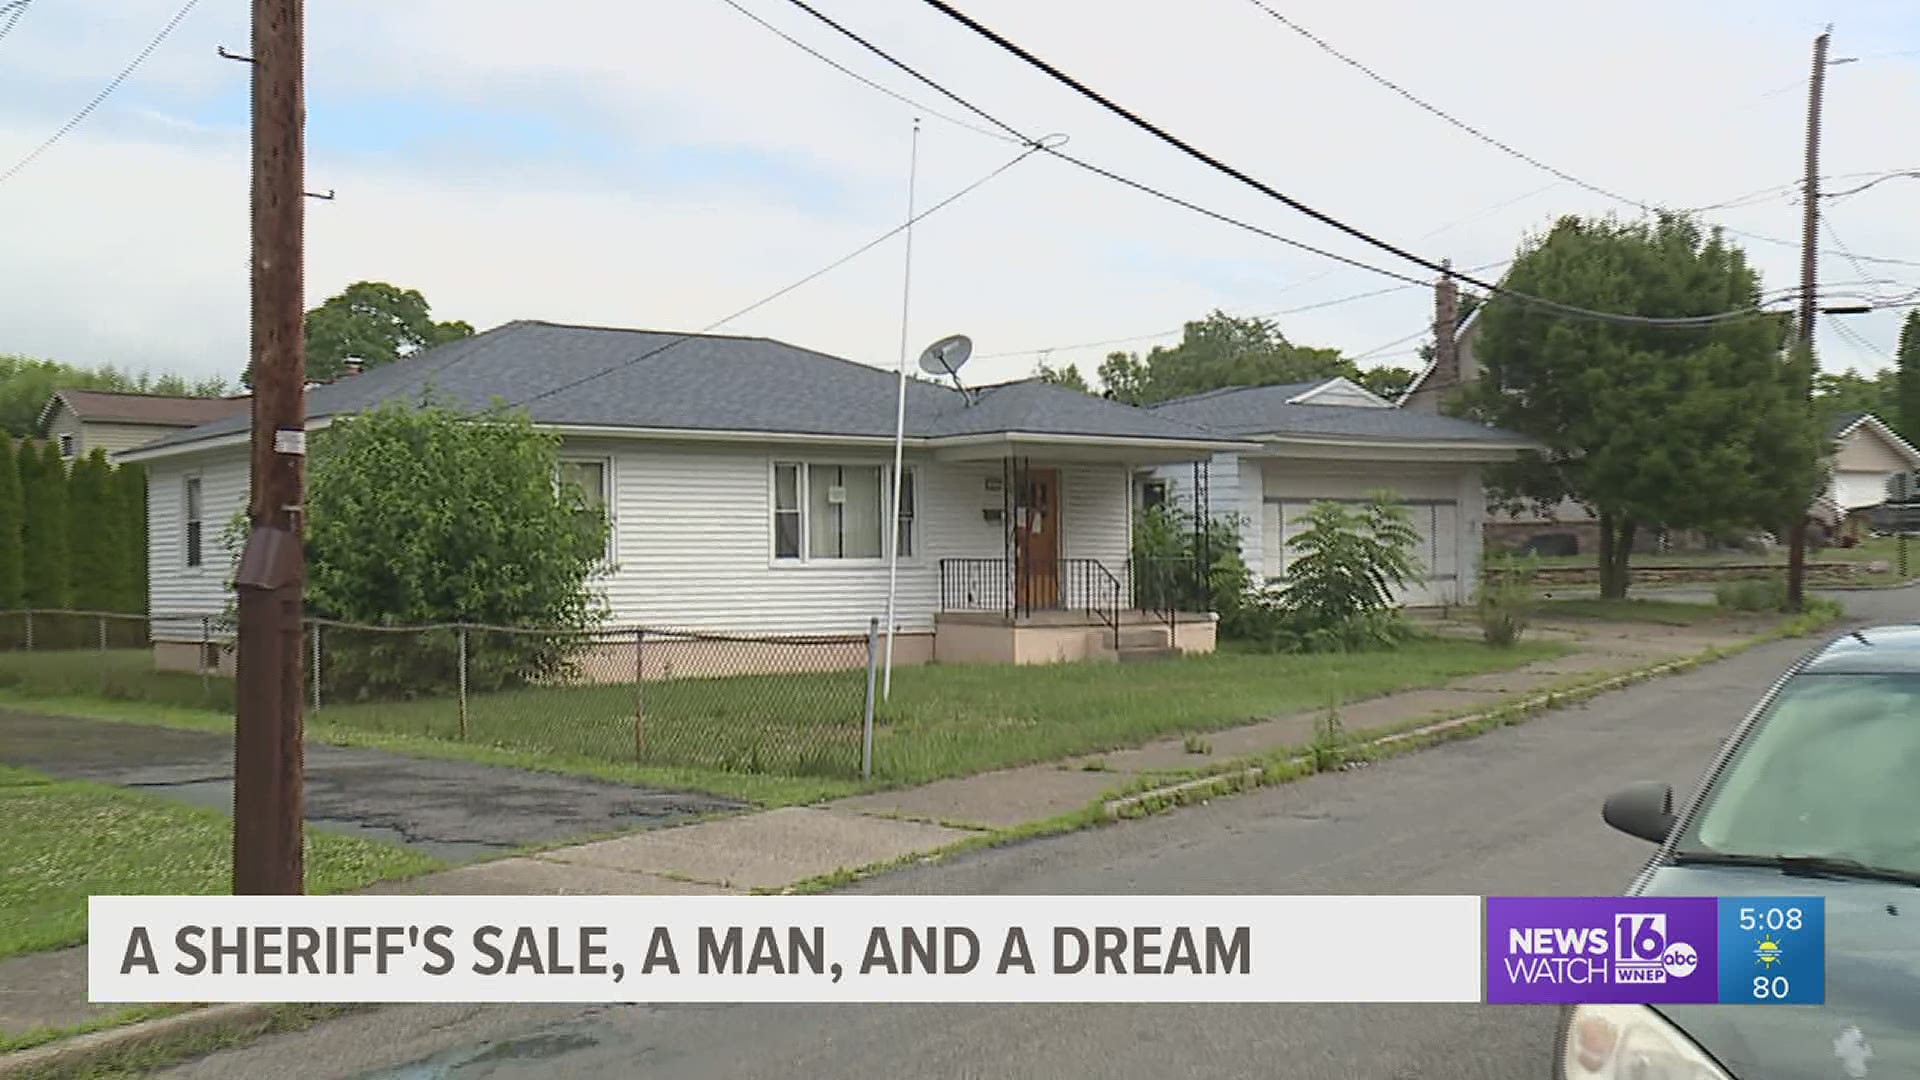 Newswatch 16's Courtney Harrison spoke with one man whose winning bid meant more than the cost of the sale.